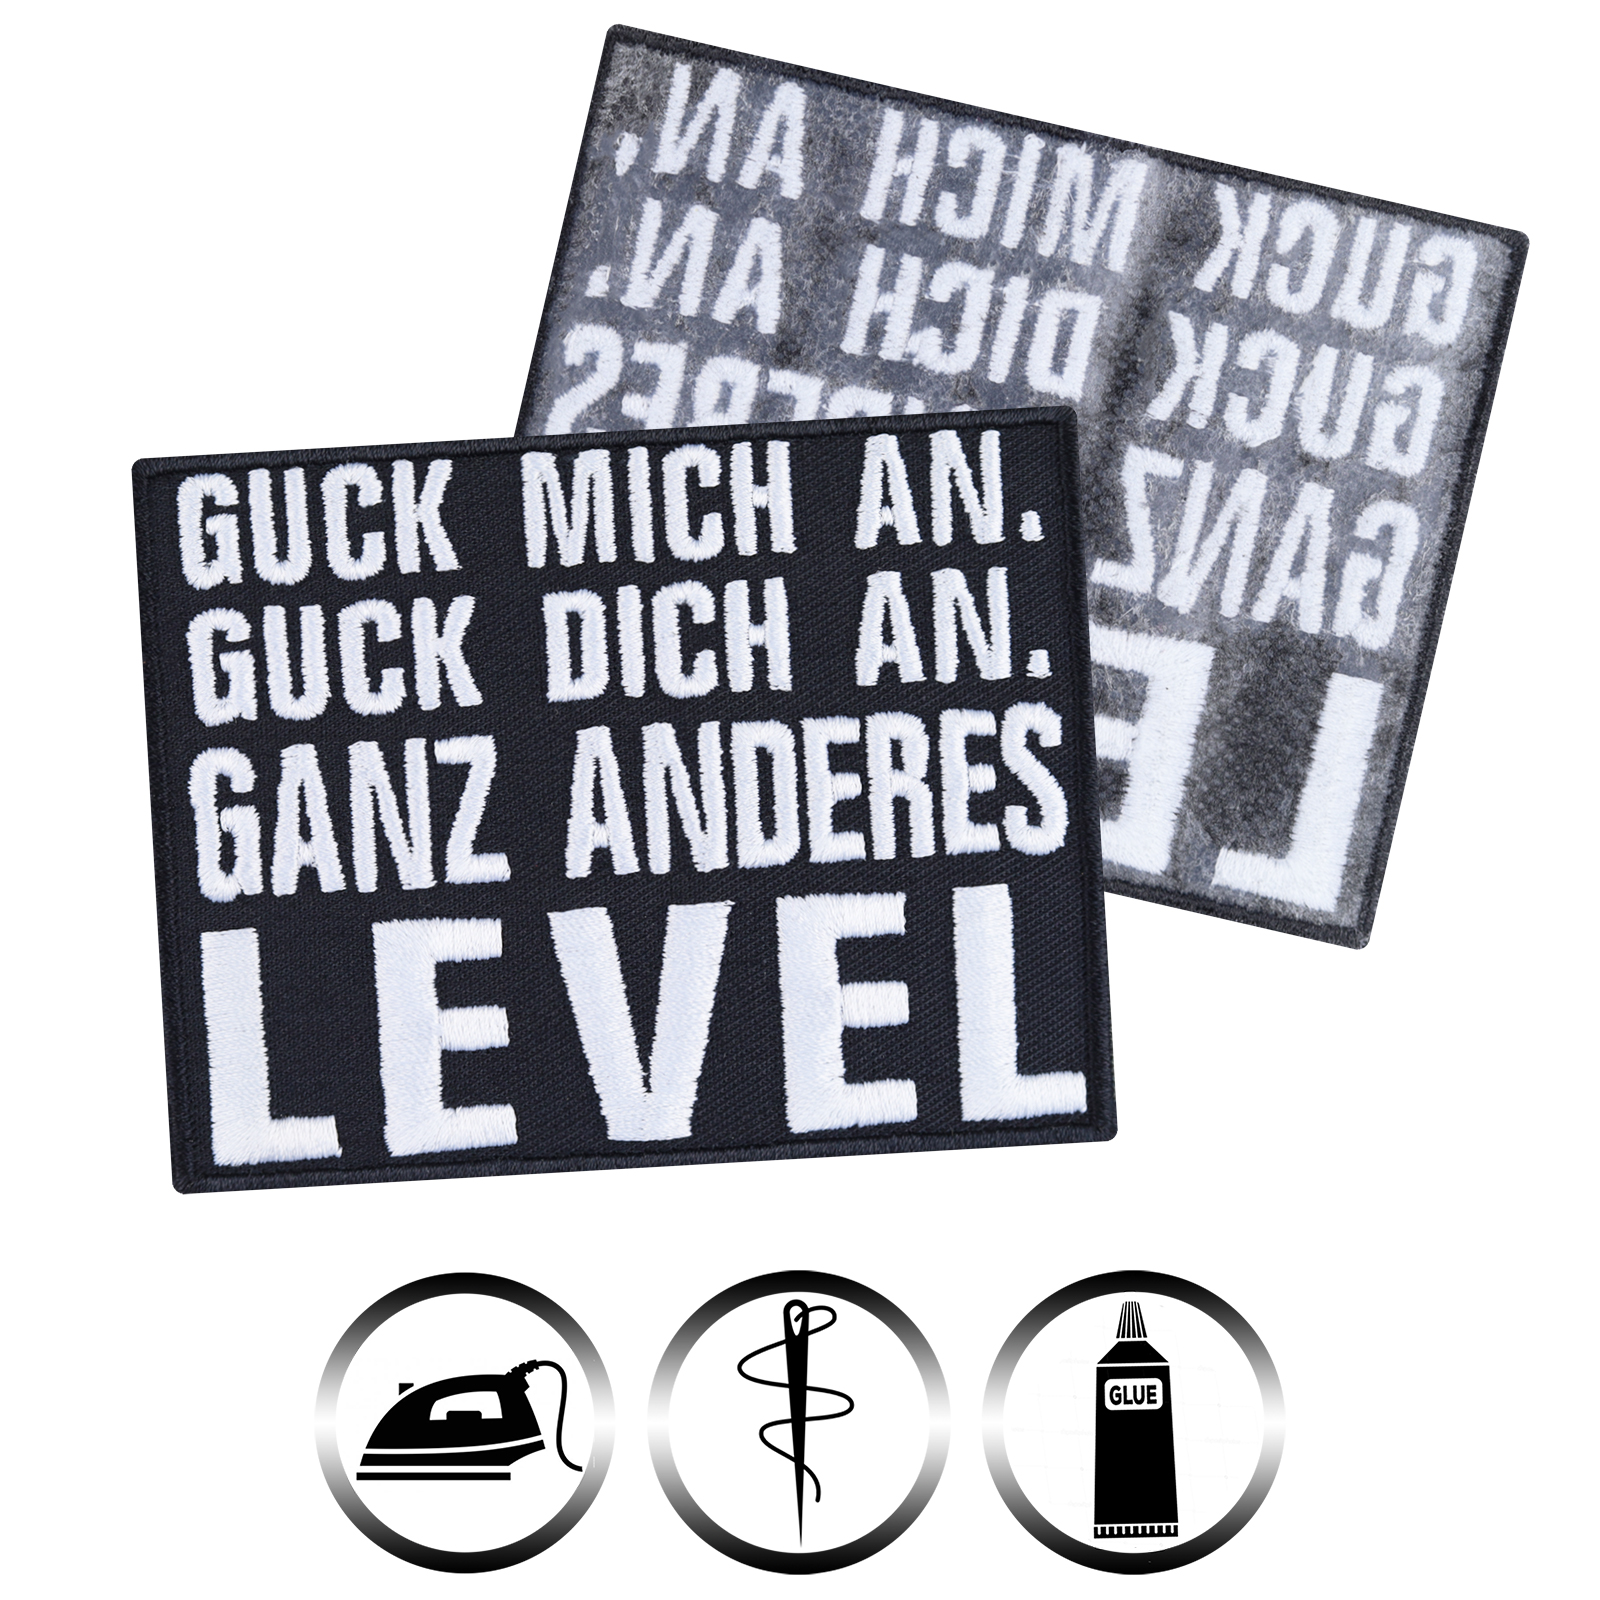 Guck mich an, guck dich an, ganz anderes Level - Patch